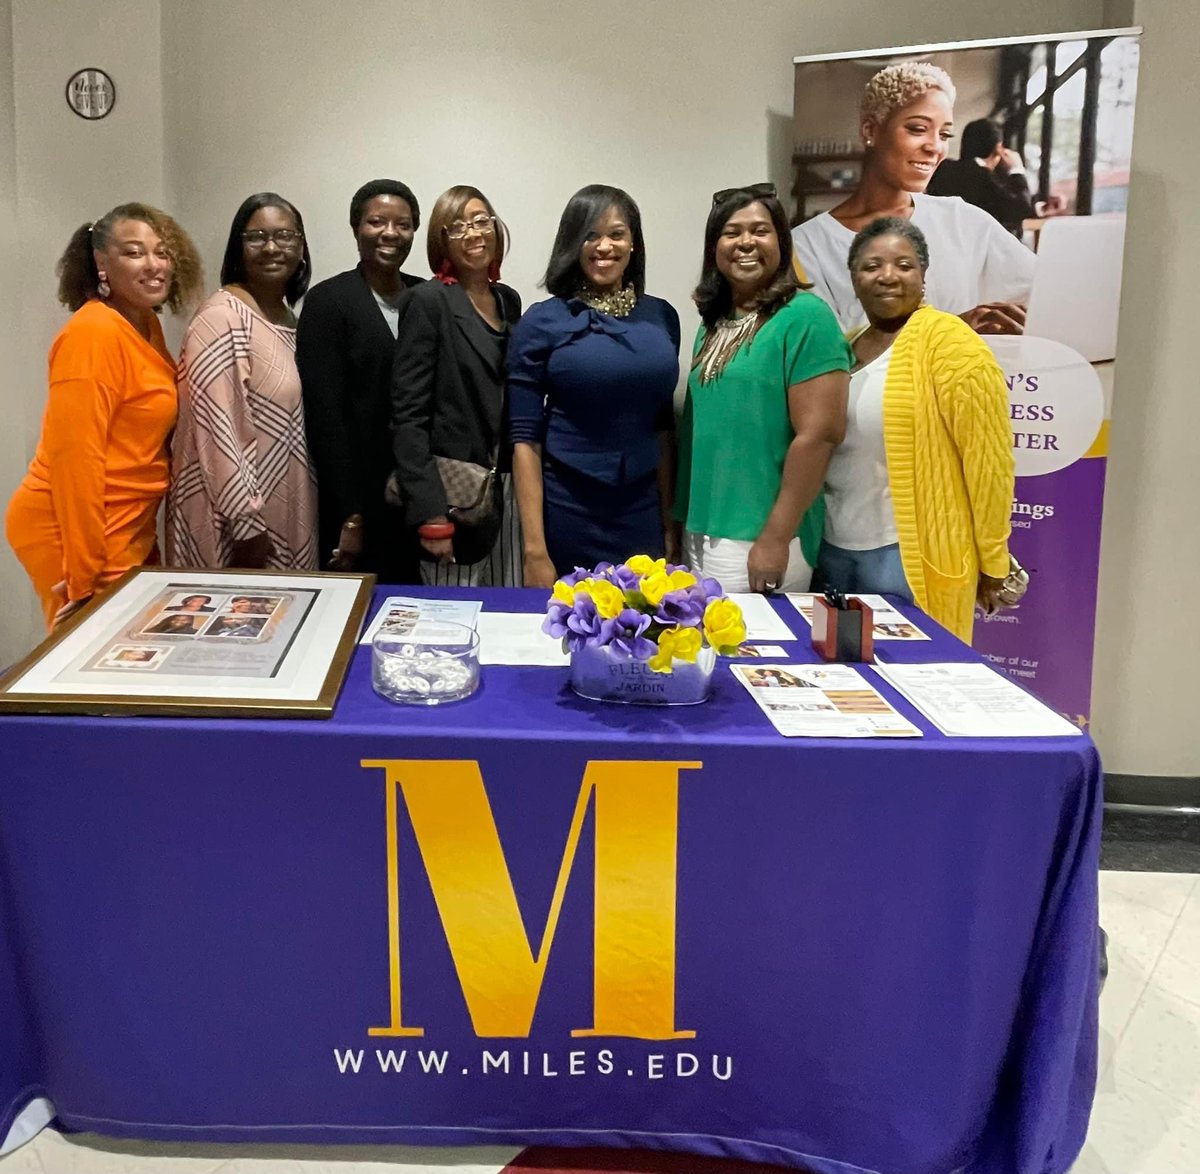 Our new Director of the Miles College Women’s Business Center with some of our ElevateHER program participants! @MilesCollege